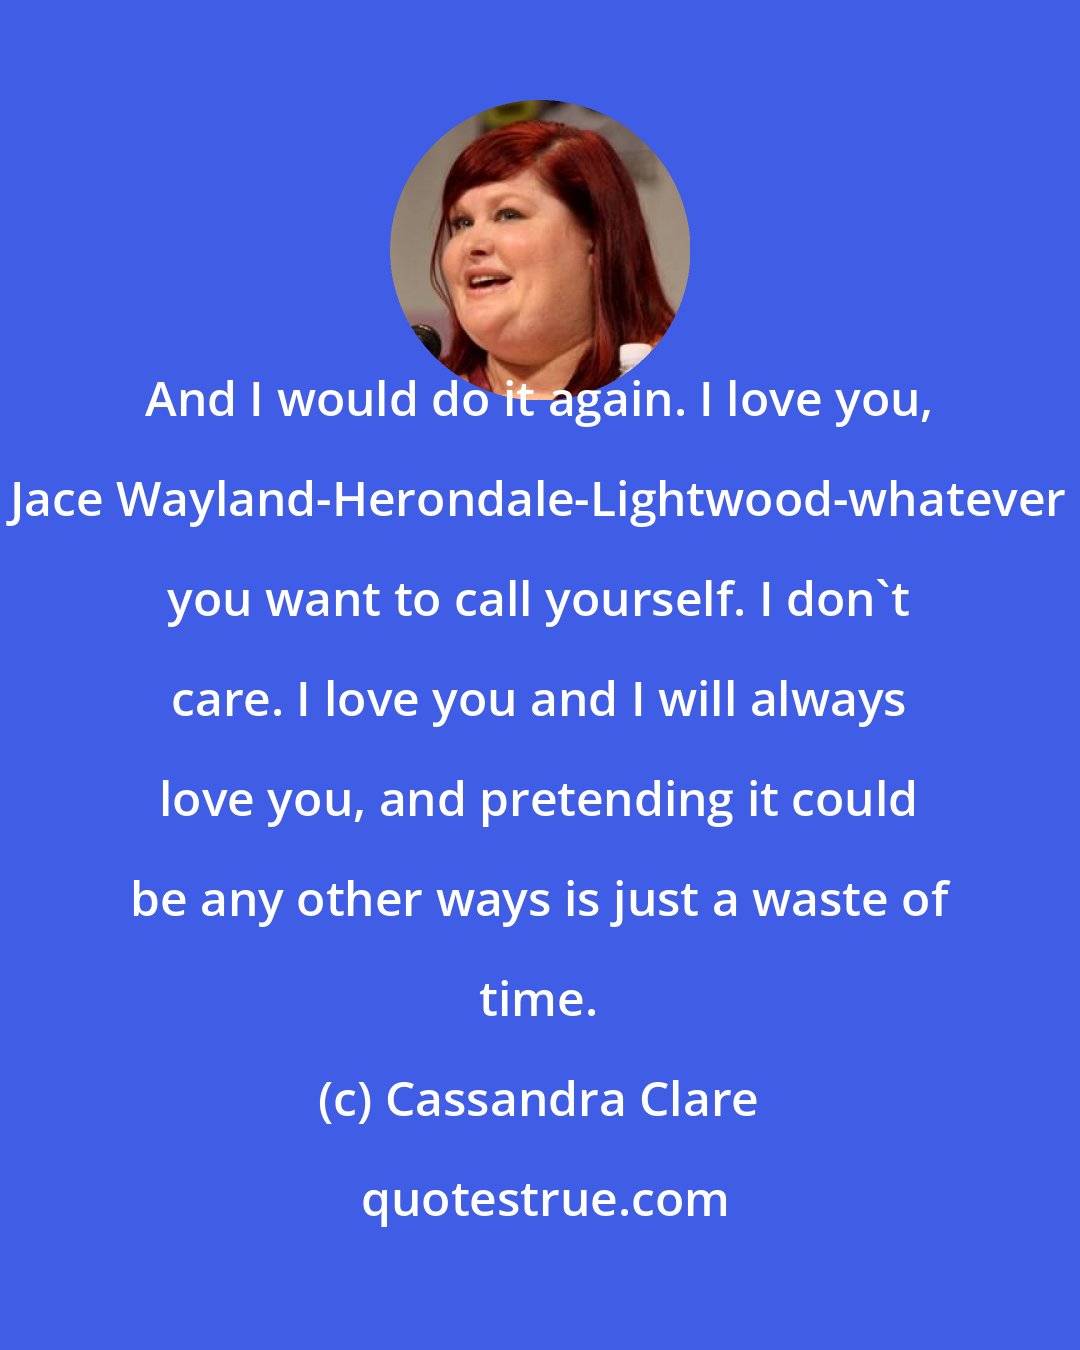 Cassandra Clare: And I would do it again. I love you, Jace Wayland-Herondale-Lightwood-whatever you want to call yourself. I don't care. I love you and I will always love you, and pretending it could be any other ways is just a waste of time.